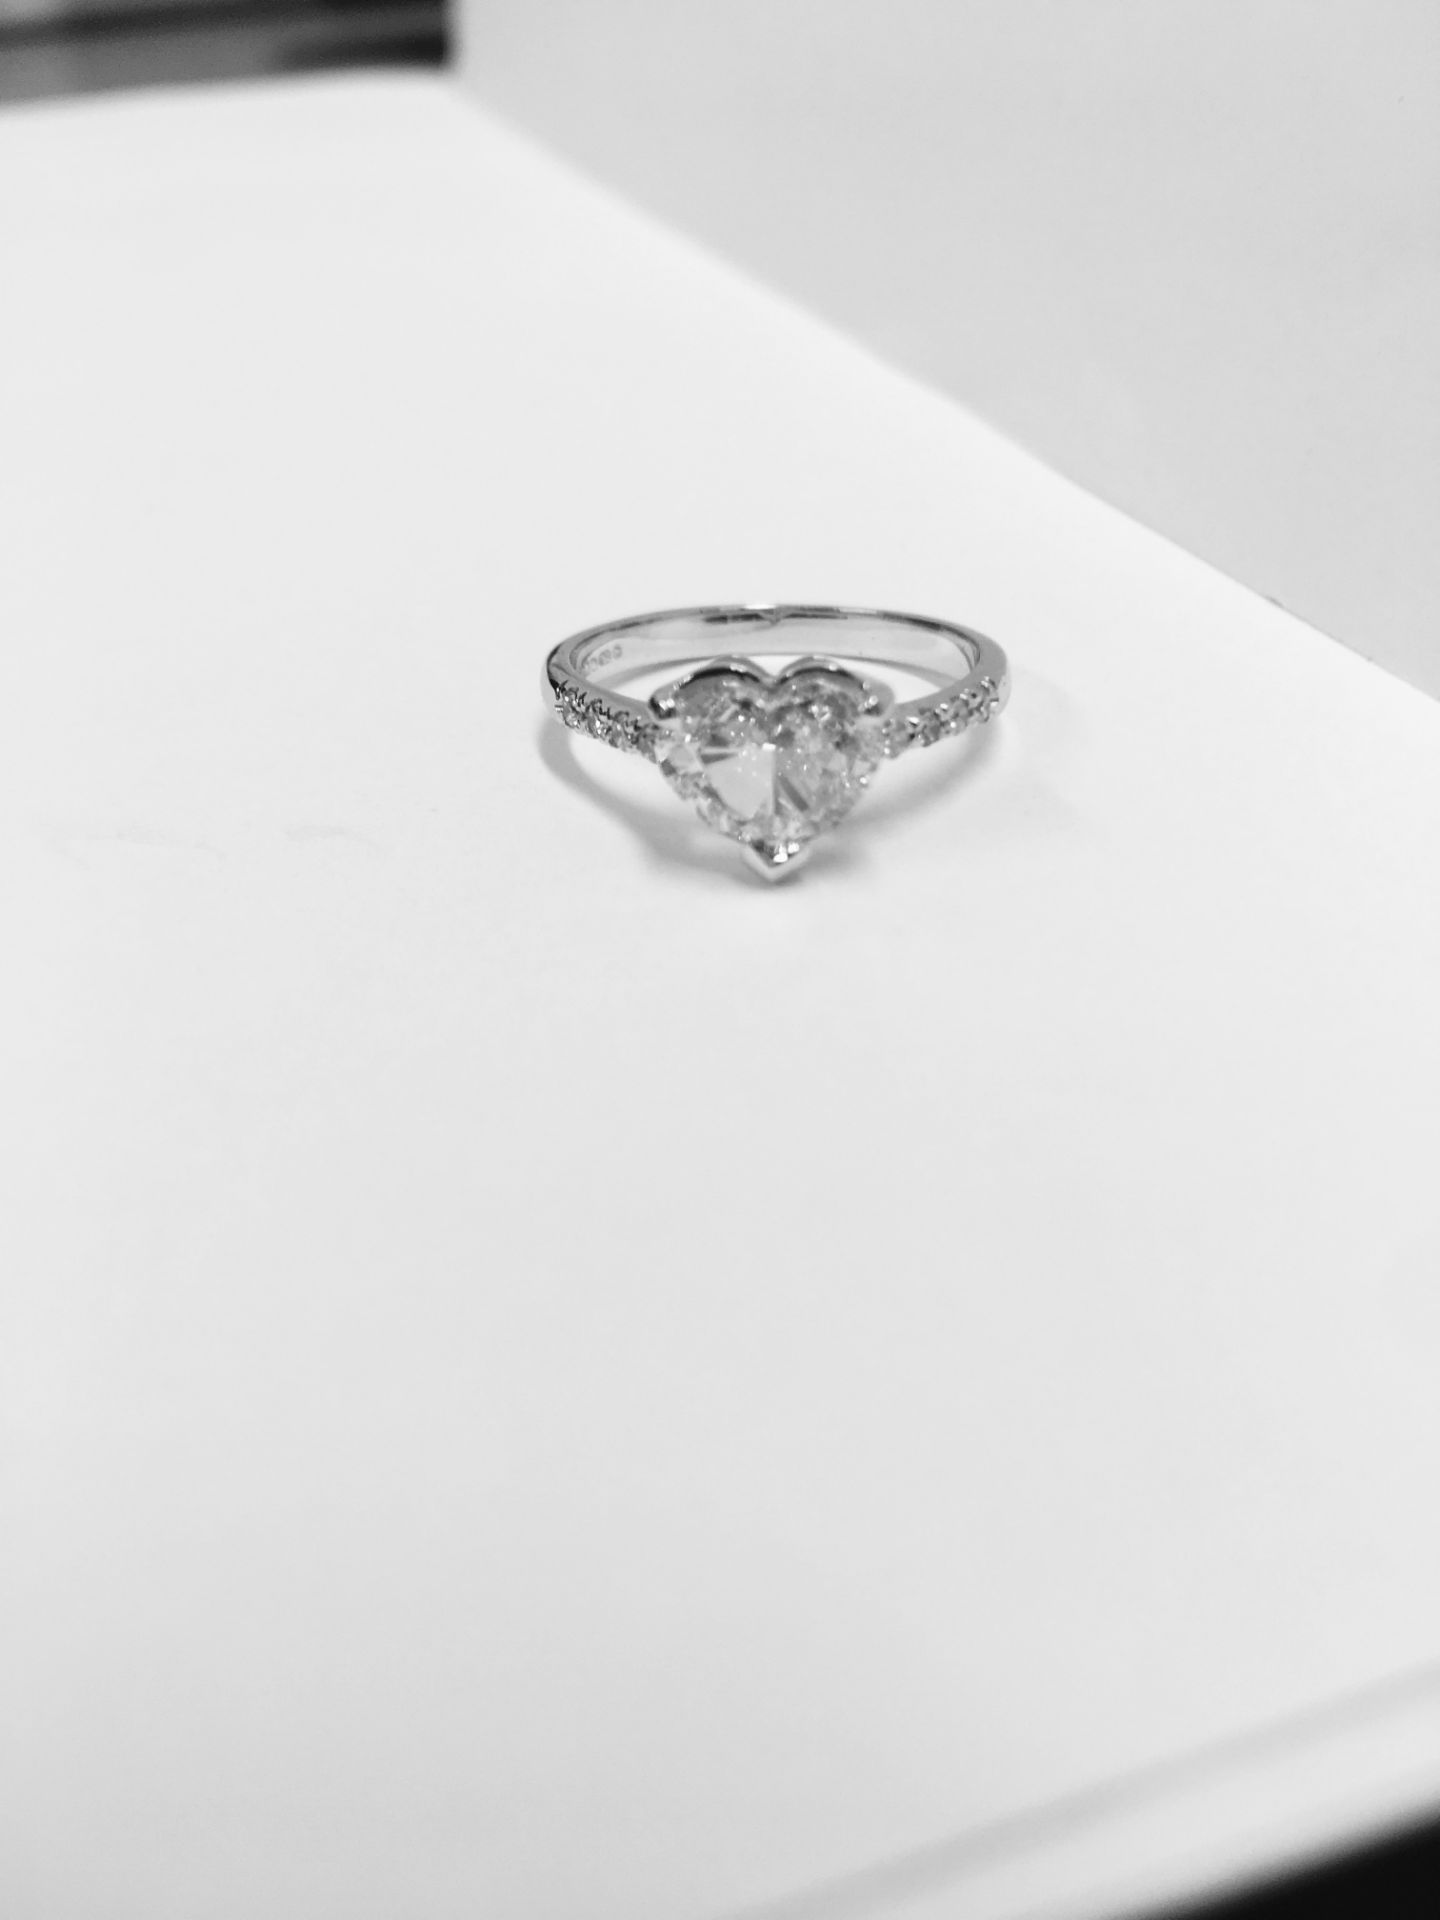 0.91ct diamond set solitaire ring set in 18ct white gold. Heart shaped diamond, I colour and Si2